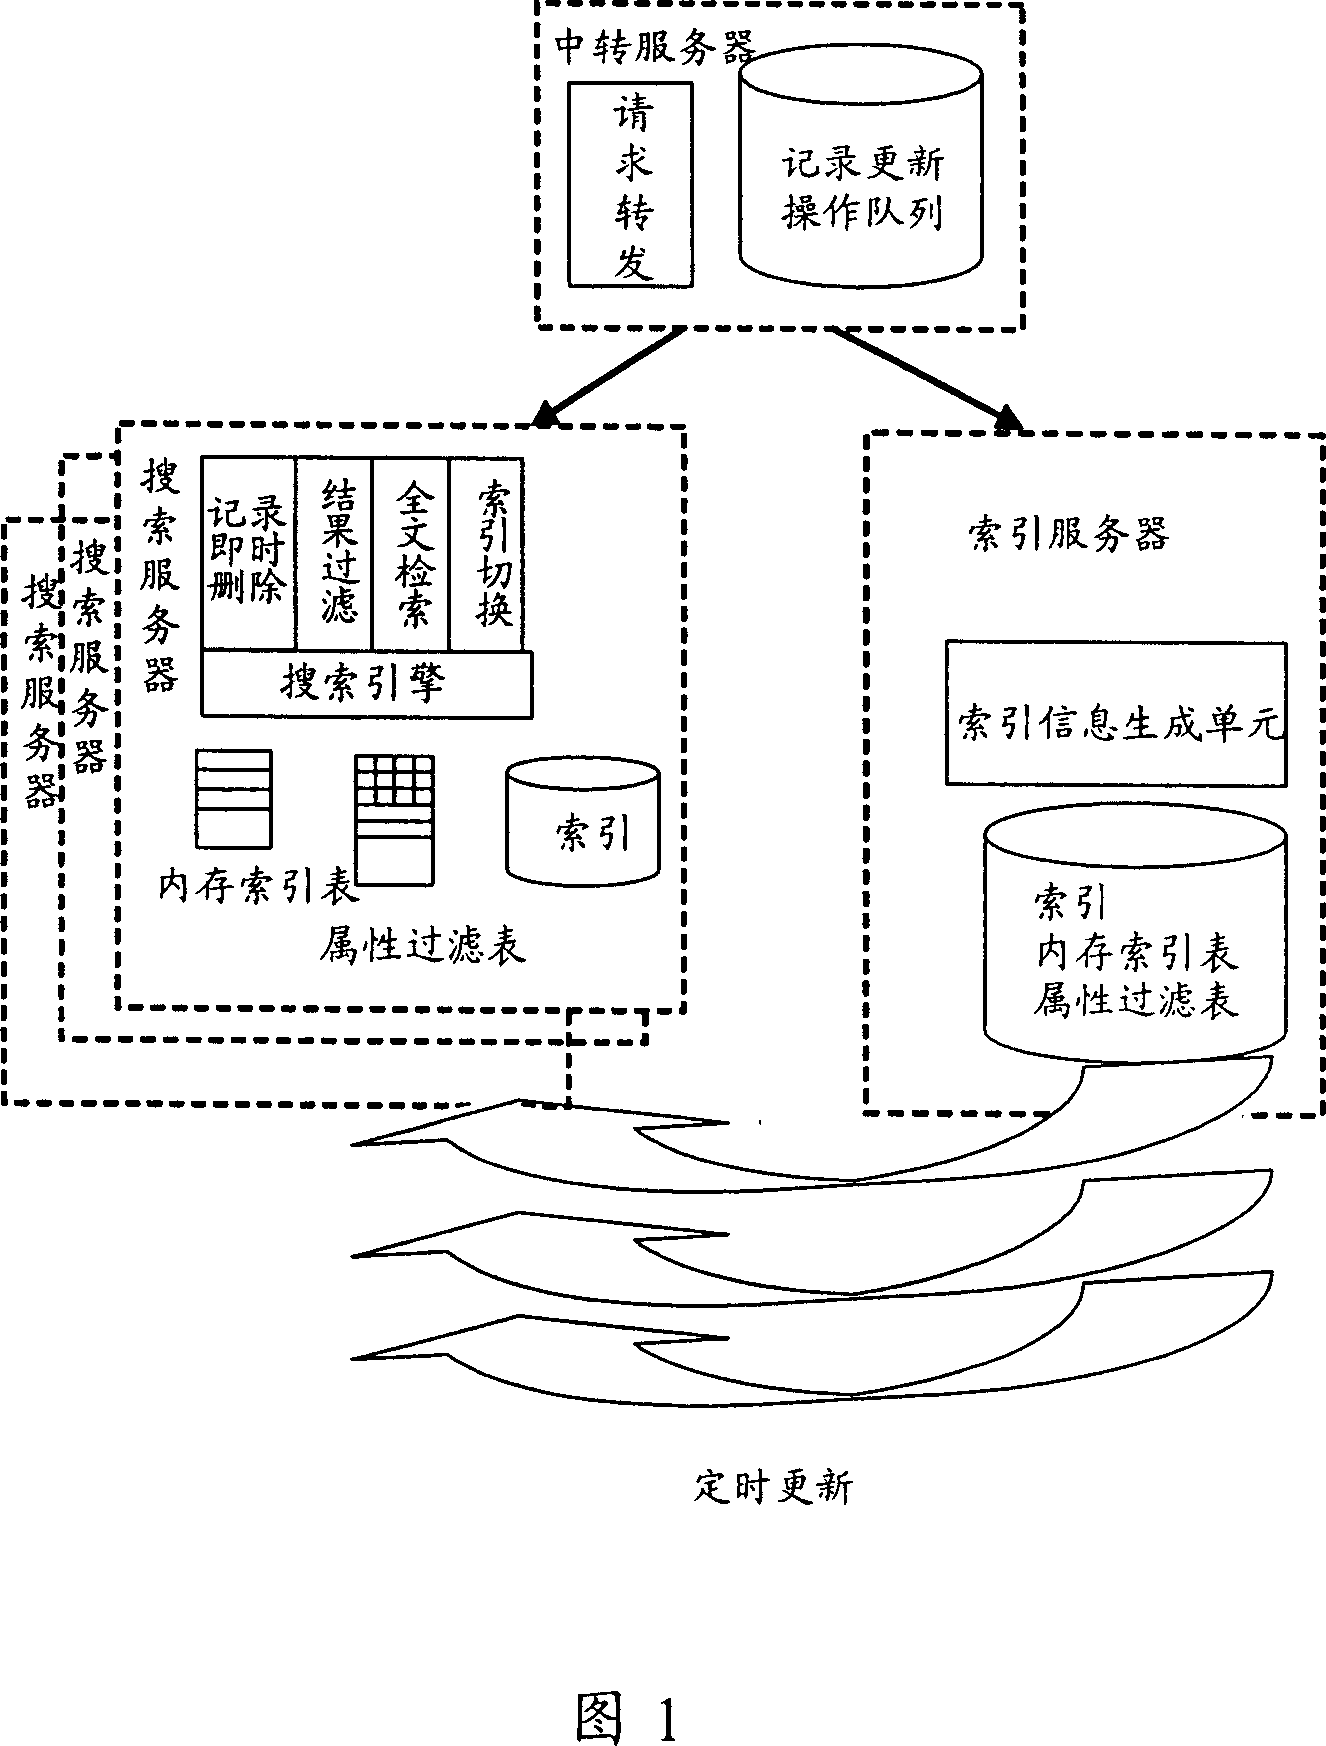 Search system index switching method and search system